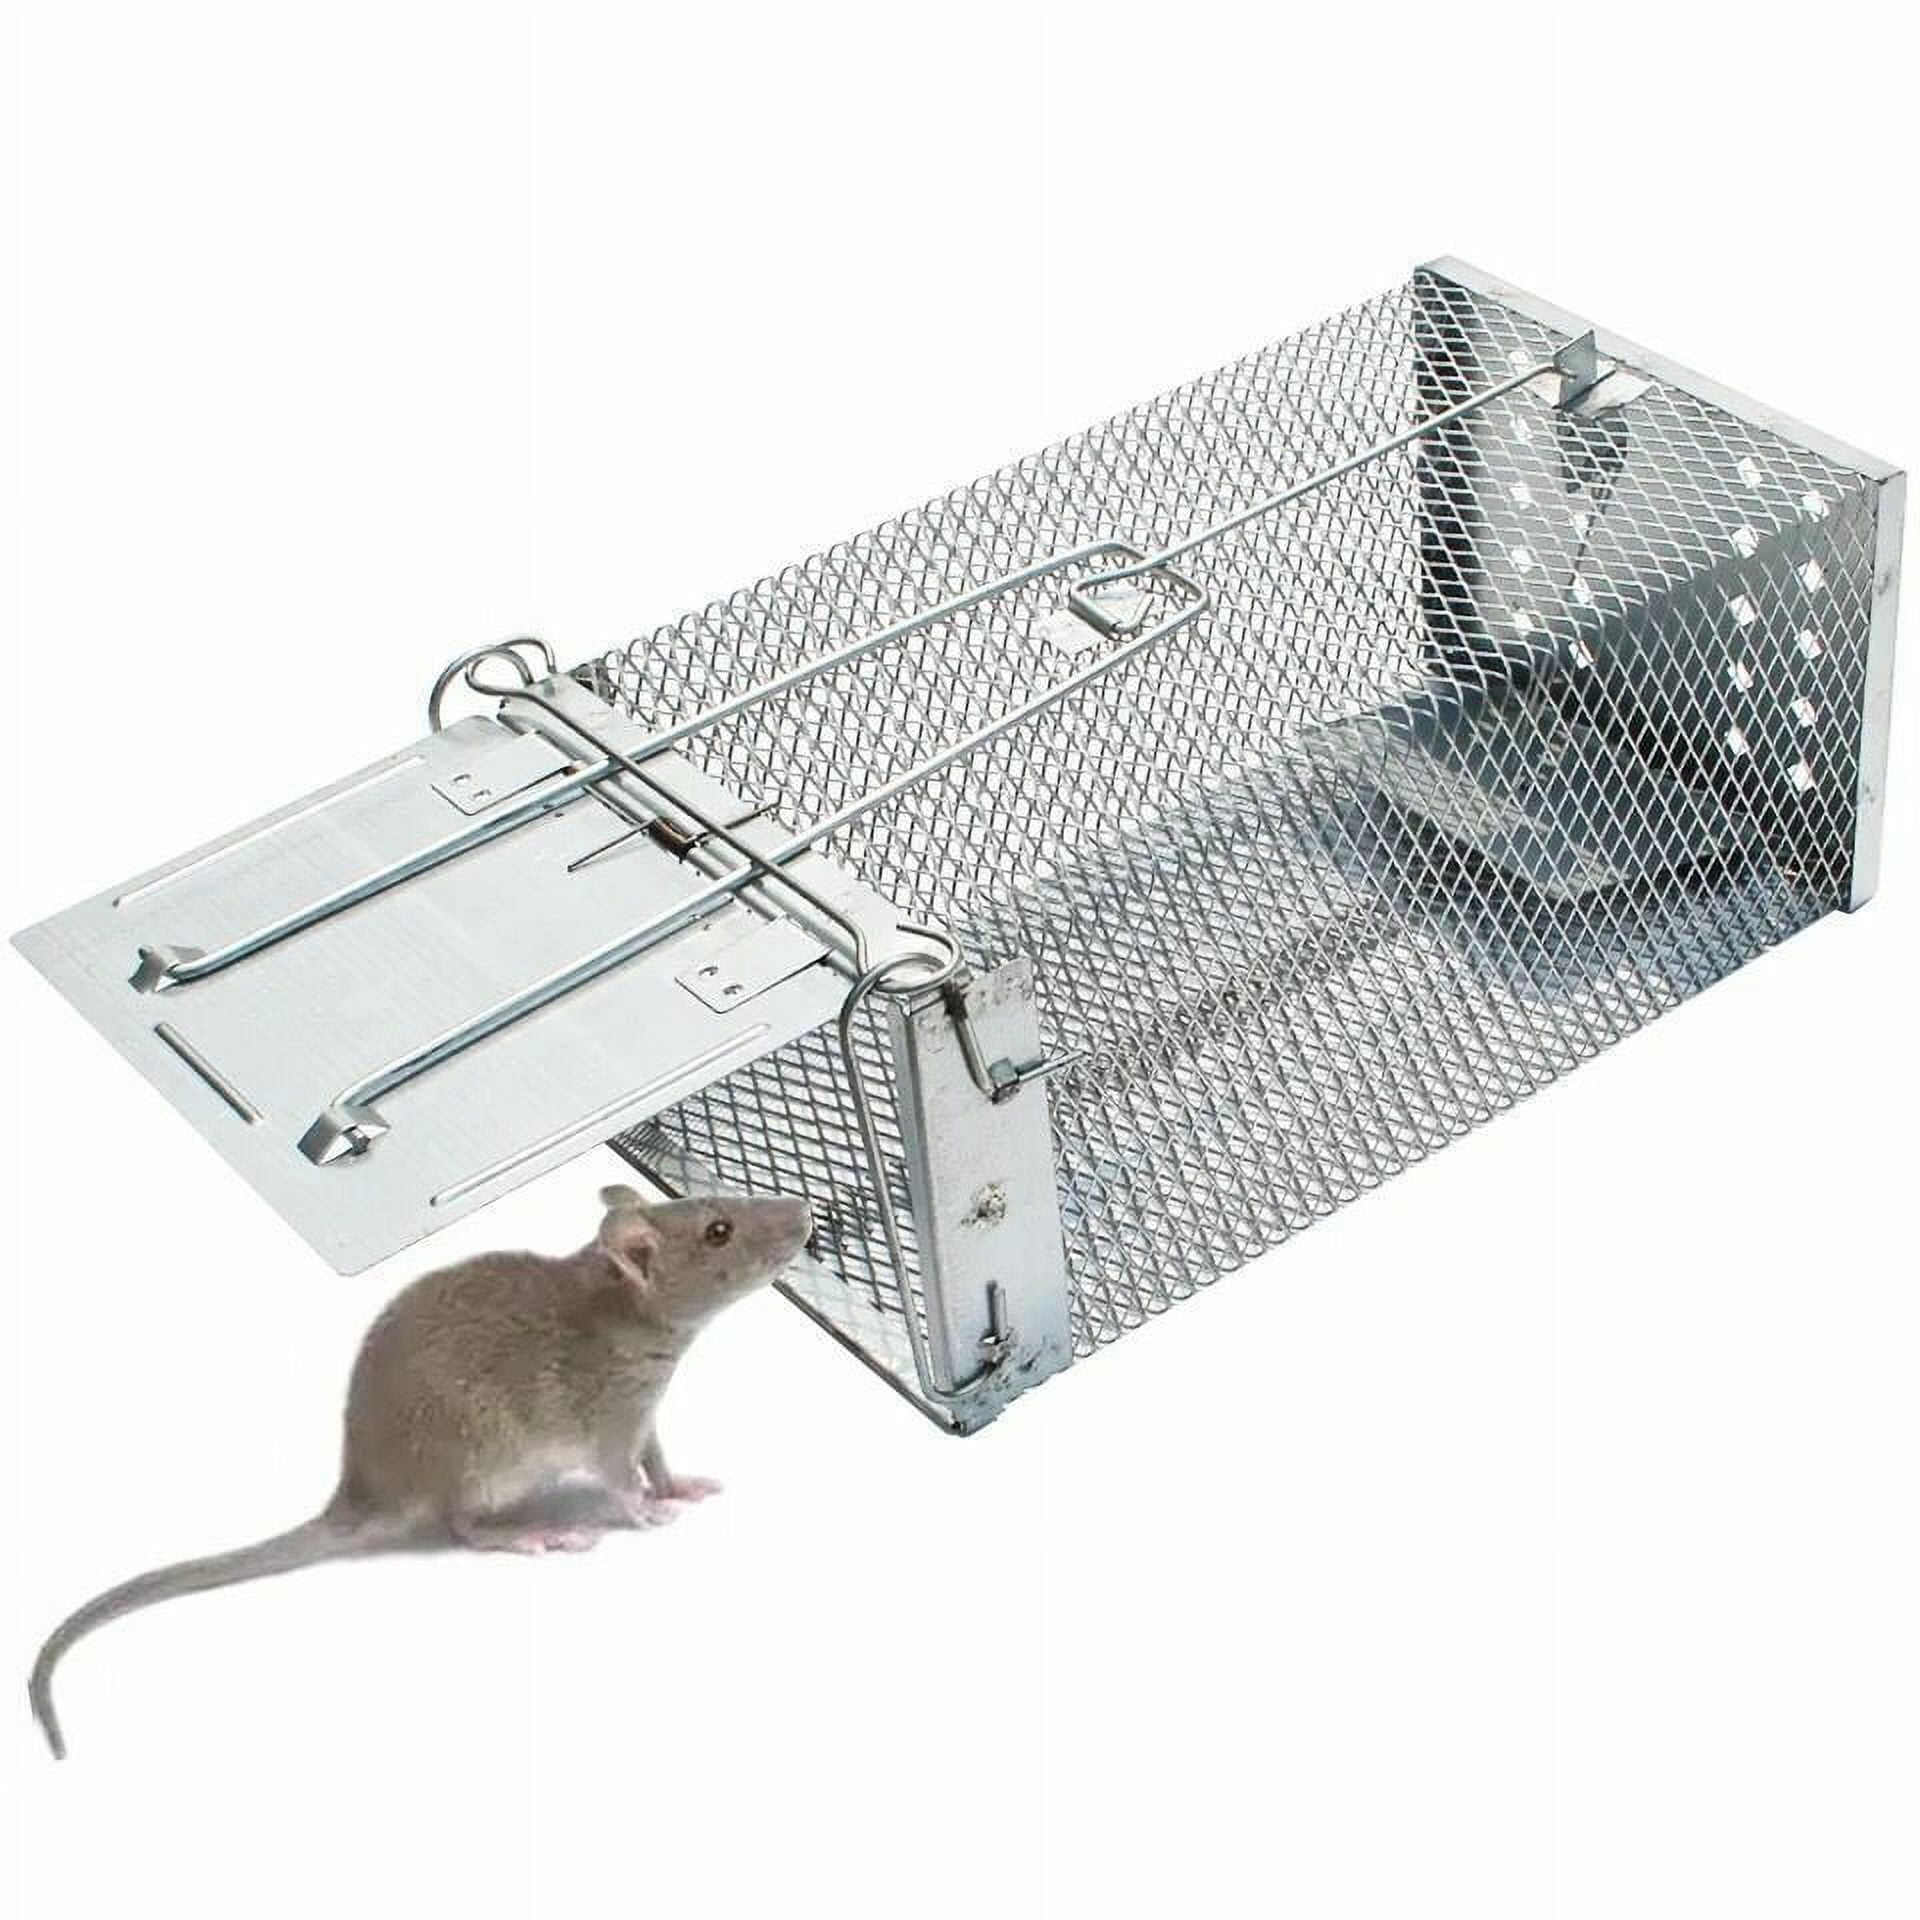 Rat Cage Trap, Catch Live Mice & Rats, Humane Mouse Traps & Rat Traps, Great for Indoors & Outdoors, Home & Animal Friendly Reusable Rat, Mouse